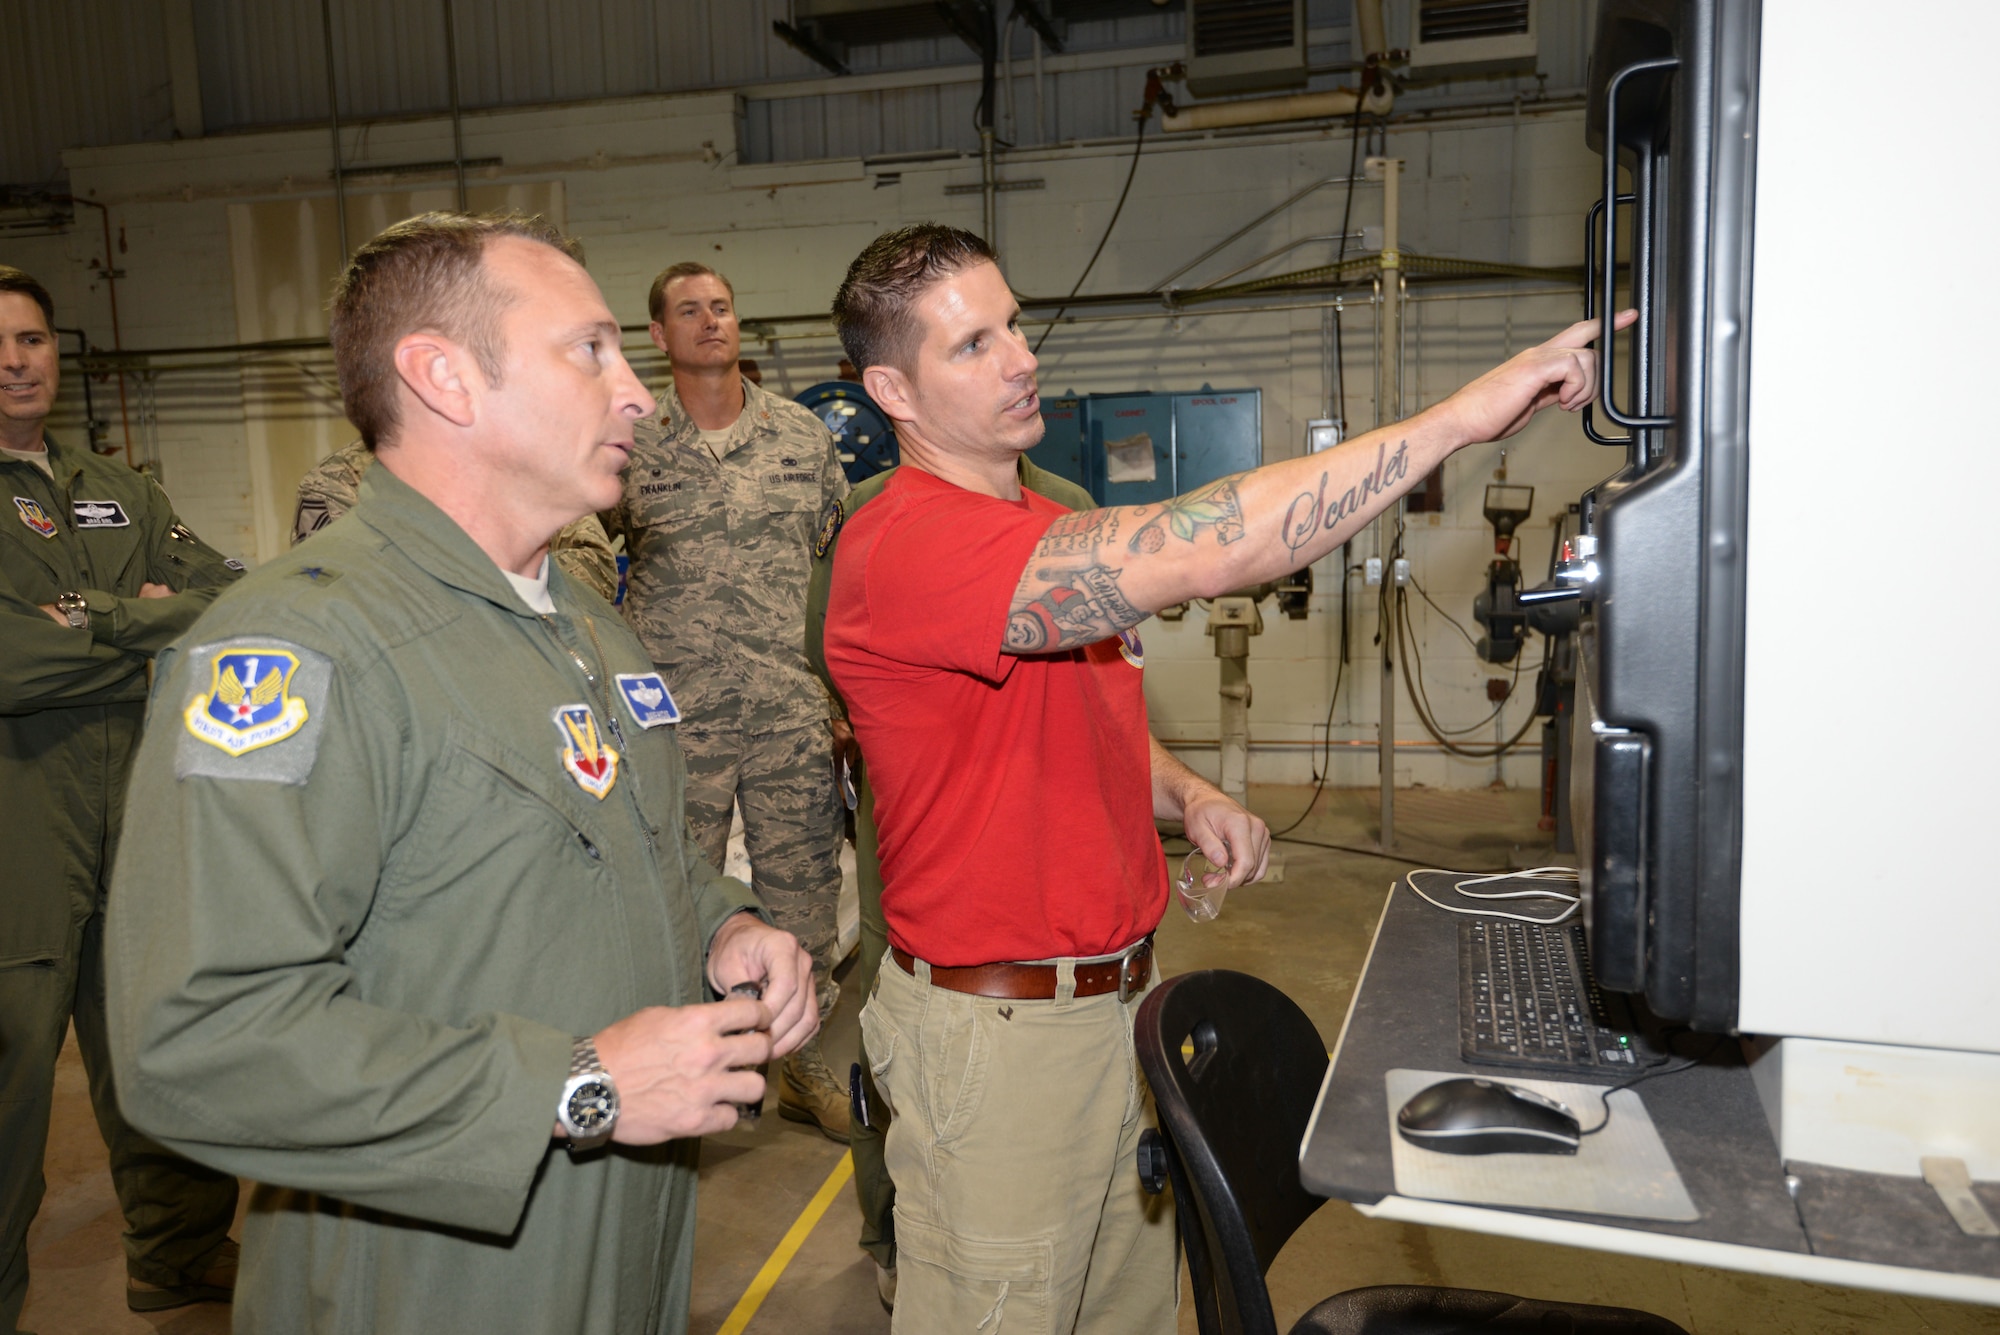 Master Sgt. James Gasaway, an air reserve technician assigned to the 513th Maintenance Squadron, shows off equipment in the fabricator section to Brig. Gen. David Hicks, the vice commander for 1st Air Force, on Sept. 29 during a brief visit to Tinker Air Force Base.  General Hicks toured the 552nd Air Control Wing and 513th Air Control Group to thank Airmen for their efforts in homeland defense and counter-drug operations.   (Air Force photo by Staff Sgt. Caleb Wanzer/Released) 